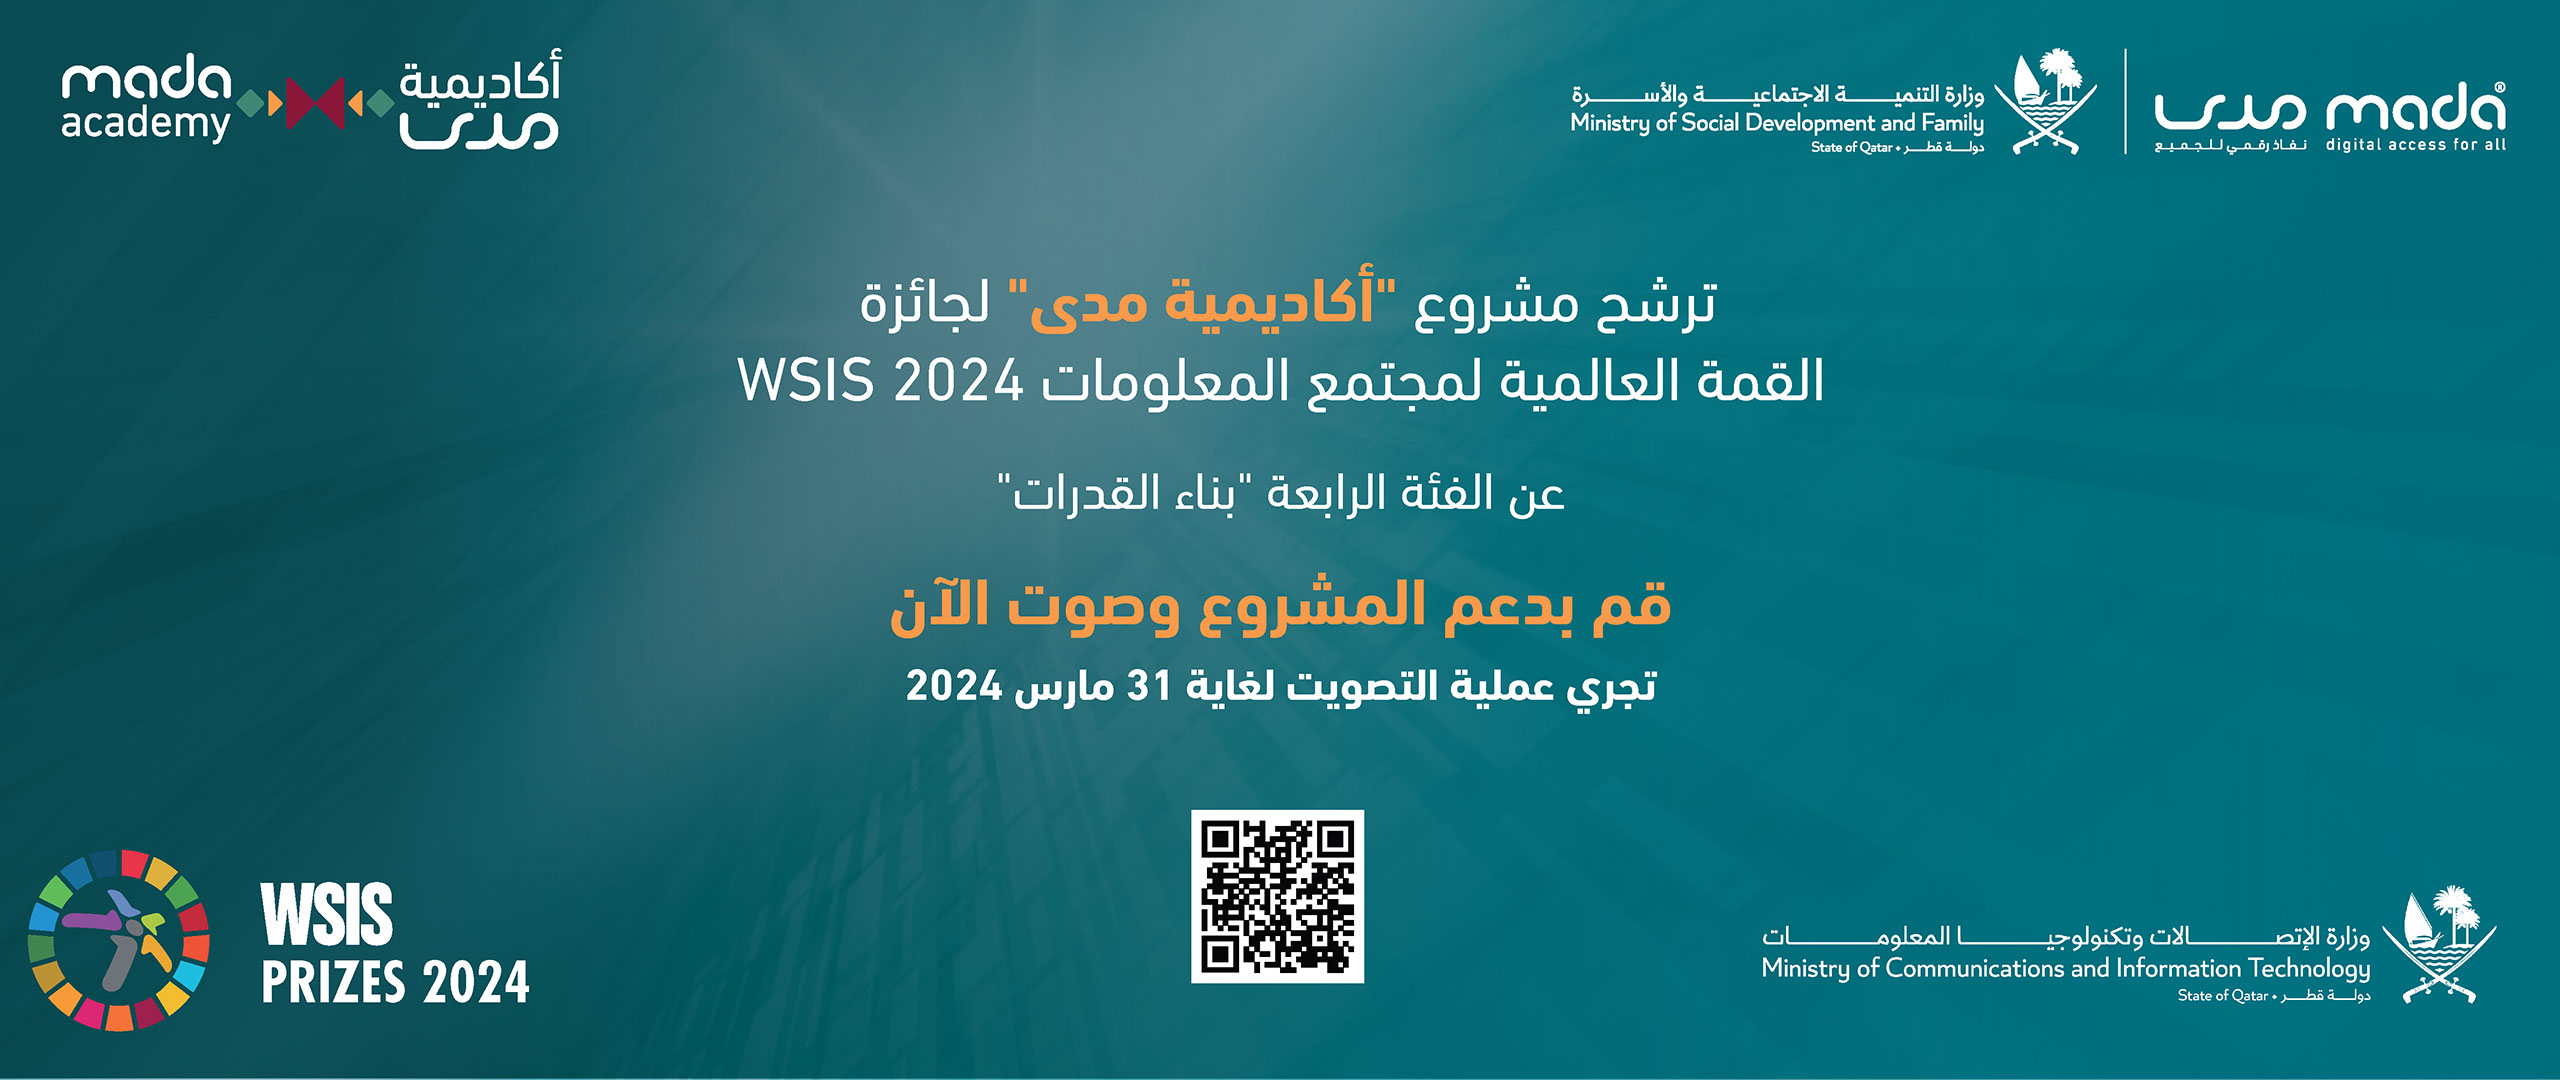 Mada Academy Project was nominated for the World Summit on the Information Society Prizes